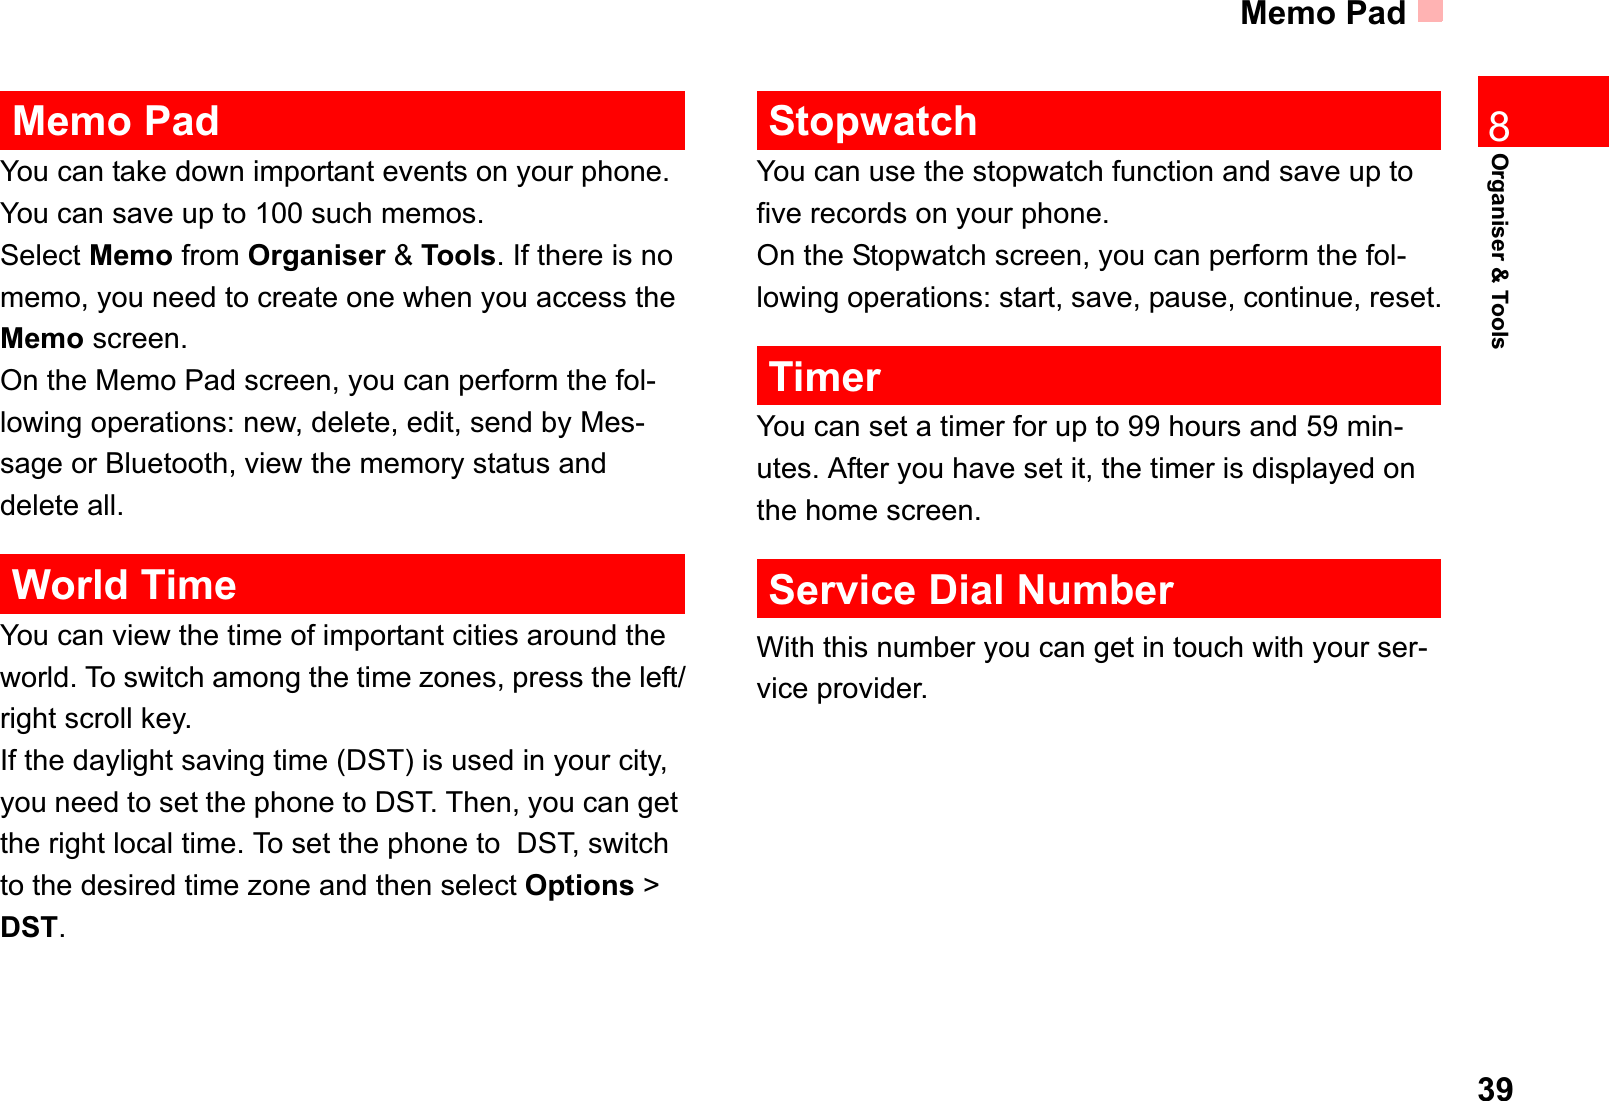 Memo Pad39Organiser &amp; Tools8Memo PadYou can take down important events on your phone. You can save up to 100 such memos.Select Memo from Organiser &amp; Tools. If there is no memo, you need to create one when you access the Memo screen.On the Memo Pad screen, you can perform the fol-lowing operations: new, delete, edit, send by Mes-sage or Bluetooth, view the memory status and delete all.World TimeYou can view the time of important cities around the world. To switch among the time zones, press the left/right scroll key.If the daylight saving time (DST) is used in your city, you need to set the phone to DST. Then, you can get the right local time. To set the phone to  DST, switch to the desired time zone and then select Options &gt; DST.StopwatchYou can use the stopwatch function and save up to five records on your phone.On the Stopwatch screen, you can perform the fol-lowing operations: start, save, pause, continue, reset.TimerYou can set a timer for up to 99 hours and 59 min-utes. After you have set it, the timer is displayed on the home screen.Service Dial NumberWith this number you can get in touch with your ser-vice provider.